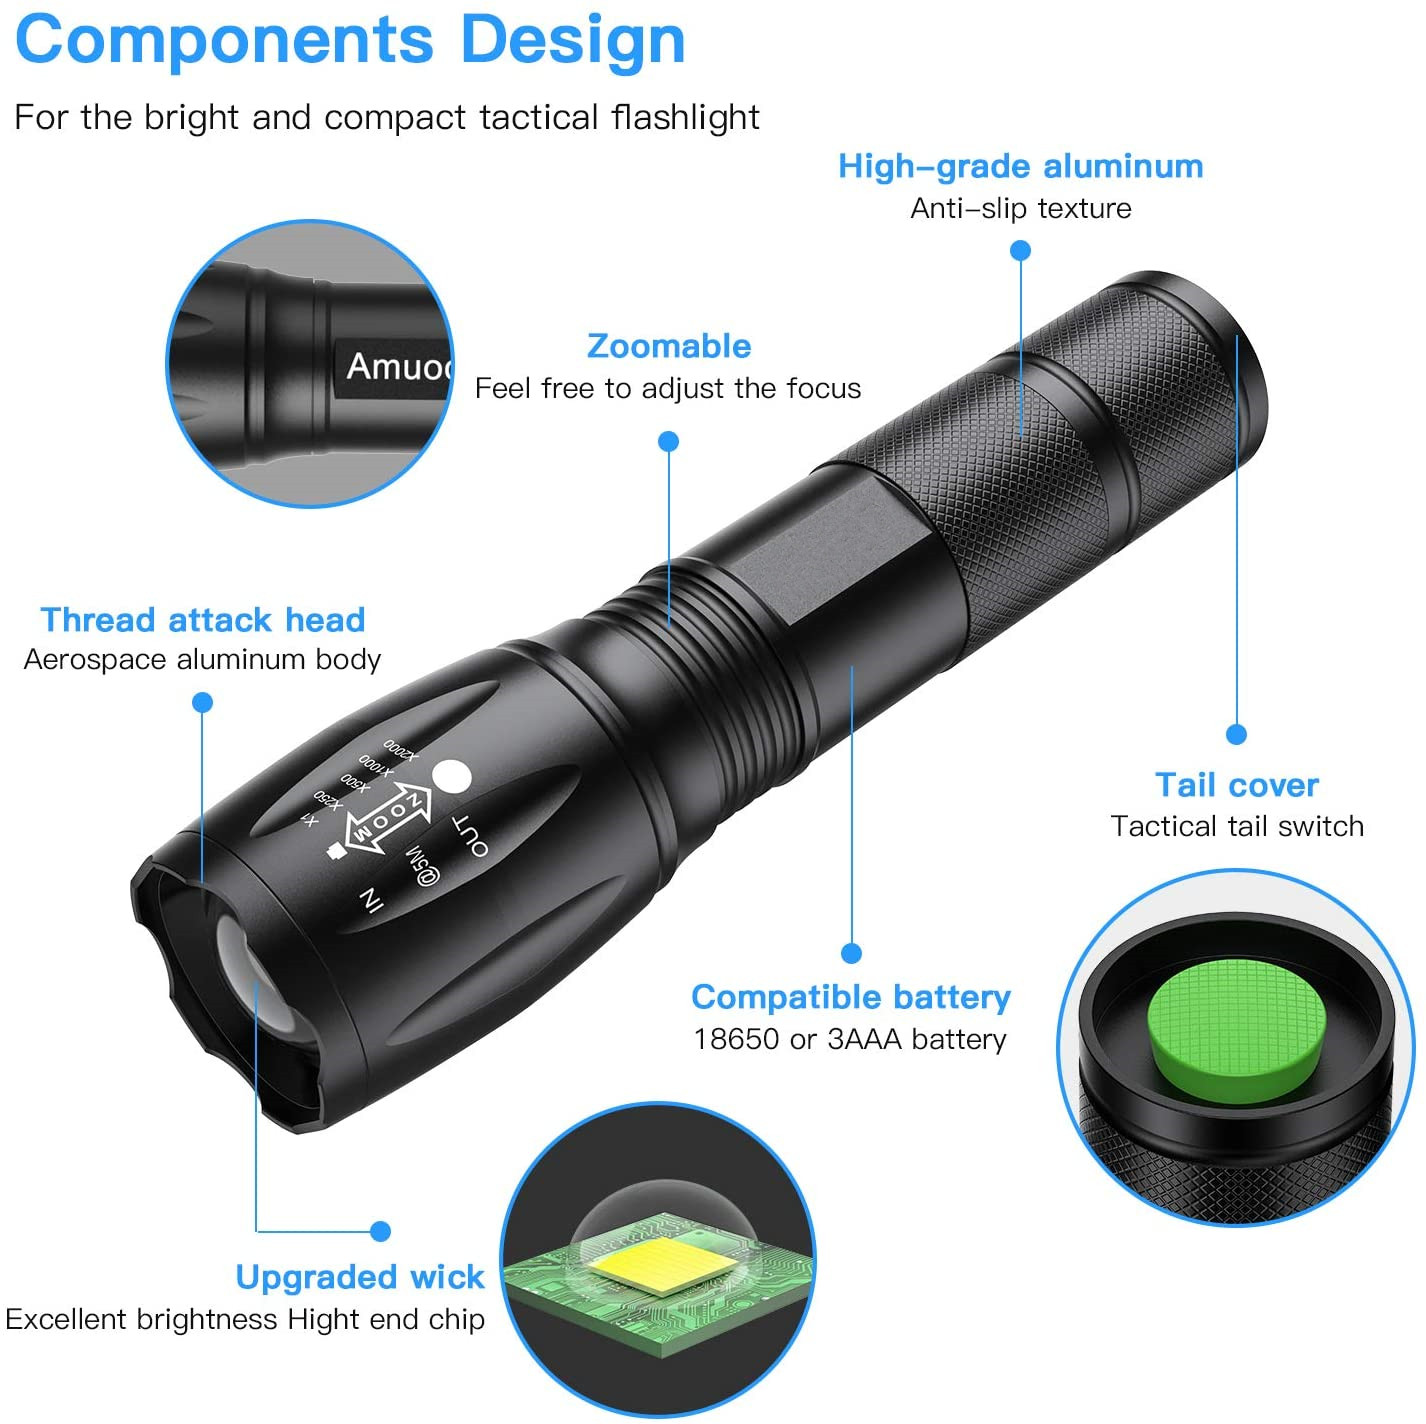 4 Pack Tactical Flashlight Torch, Military Grade 5 Modes XML T6 3000 Lumens Tactical Led Waterproof Handheld Flashlight for Camping Biking Hiking Outdoor Home Emergency - image 2 of 7